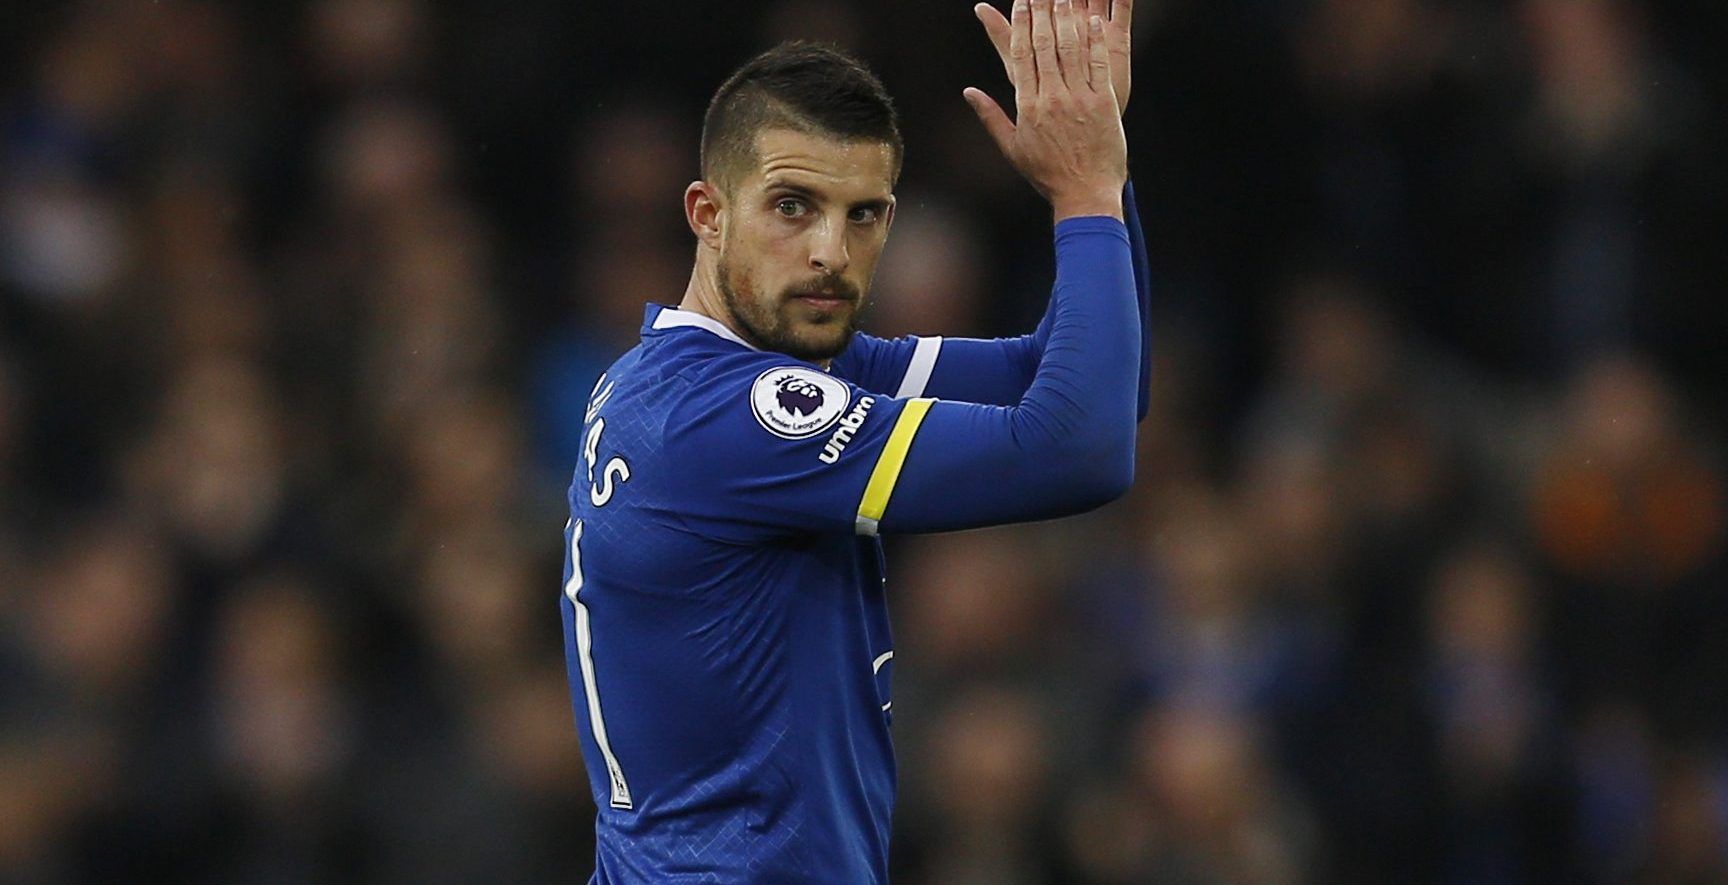 Britain Football Soccer - Everton v West Bromwich Albion - Premier League - Goodison Park - 11/3/17 Everton's Kevin Mirallas applauds fans as he is substituted  Action Images via Reuters / Craig Brough Livepic EDITORIAL USE ONLY. No use with unauthorized audio, video, data, fixture lists, club/league logos or 